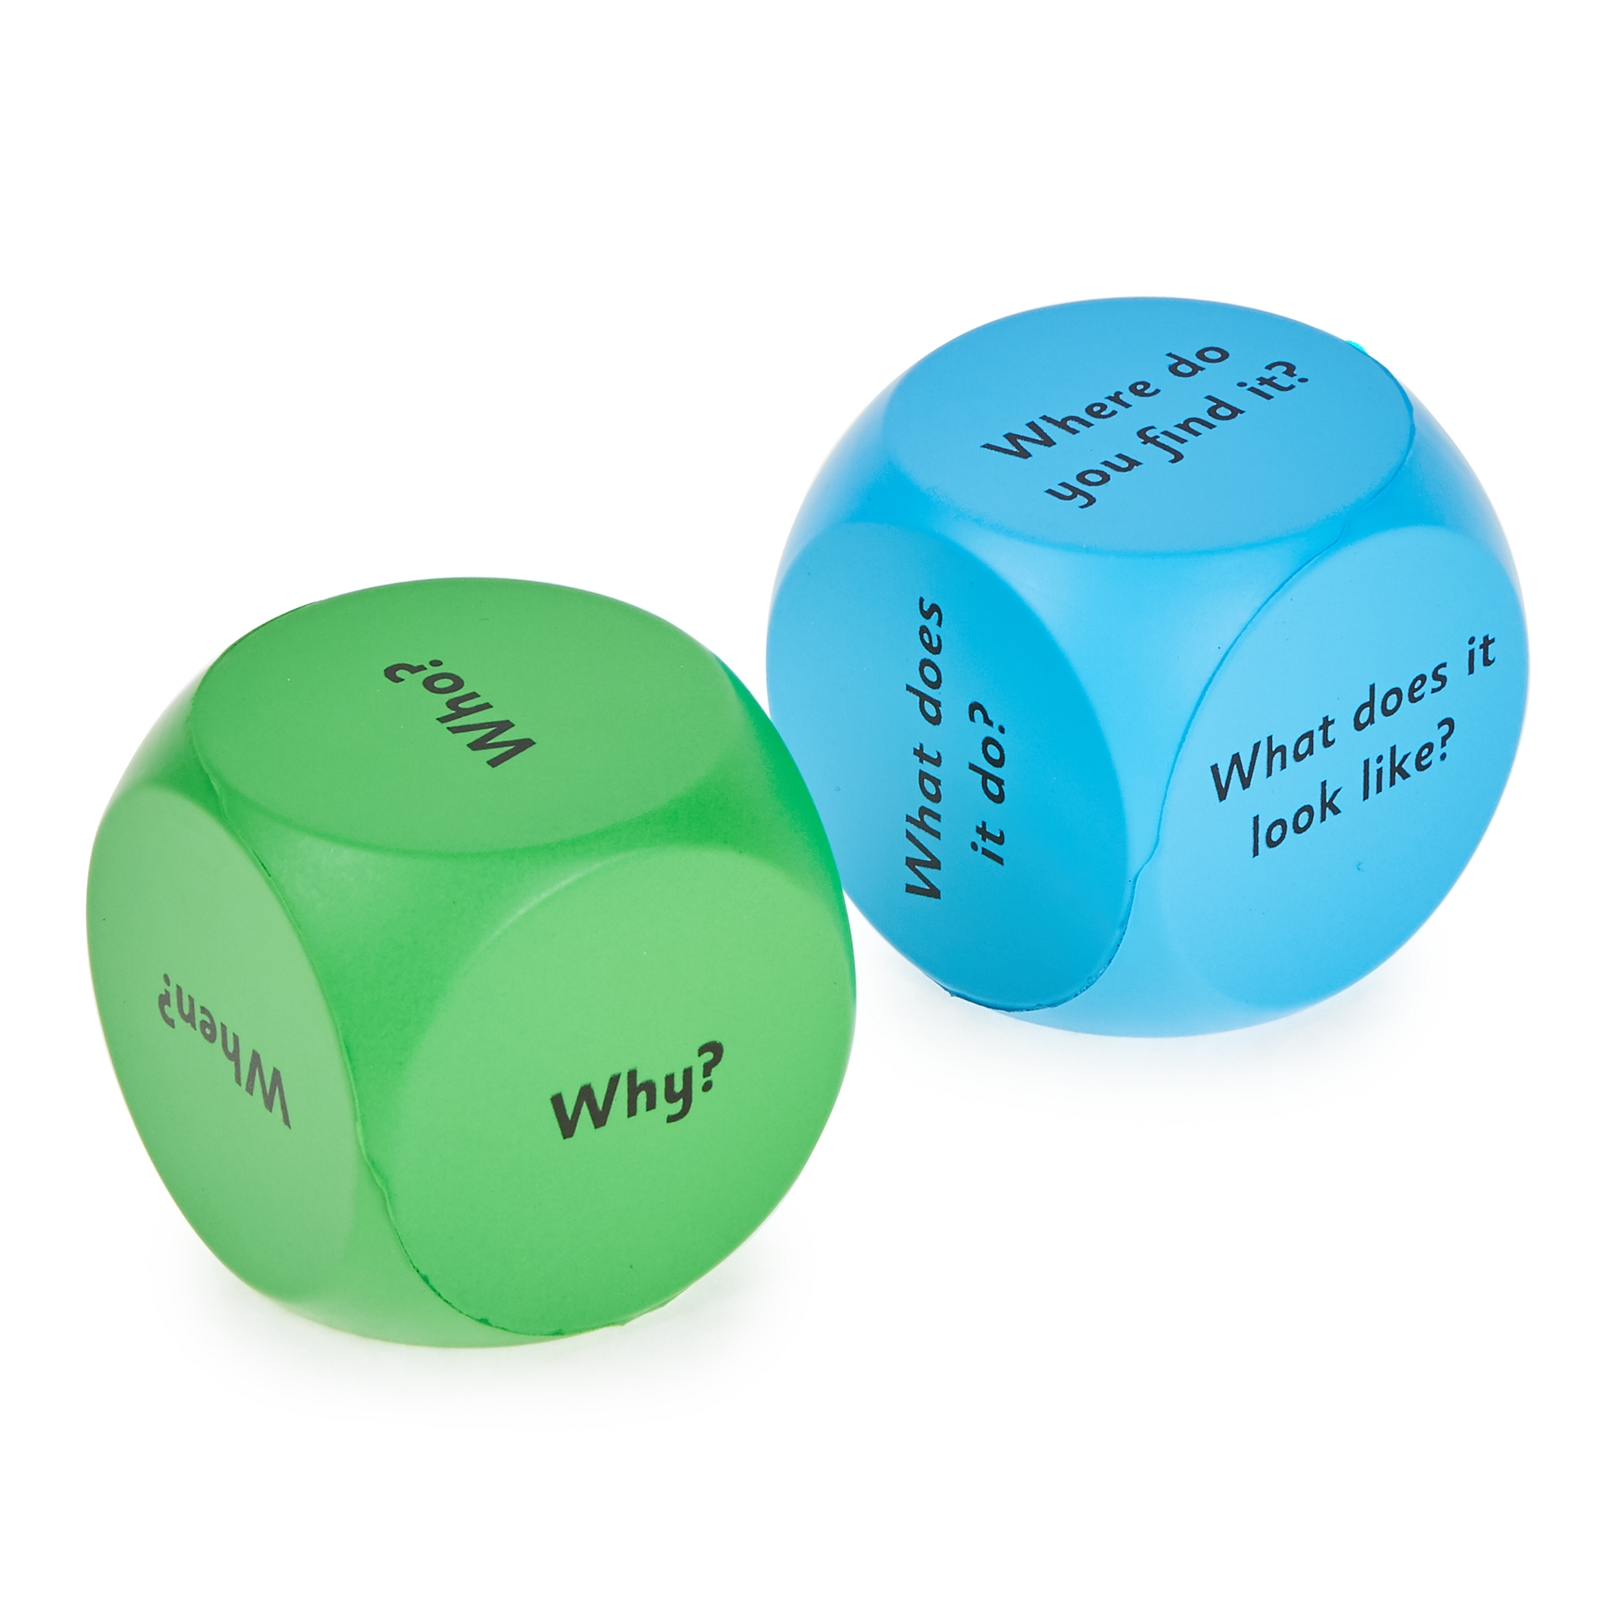 Questions and Describing Cubes - Pack of 2